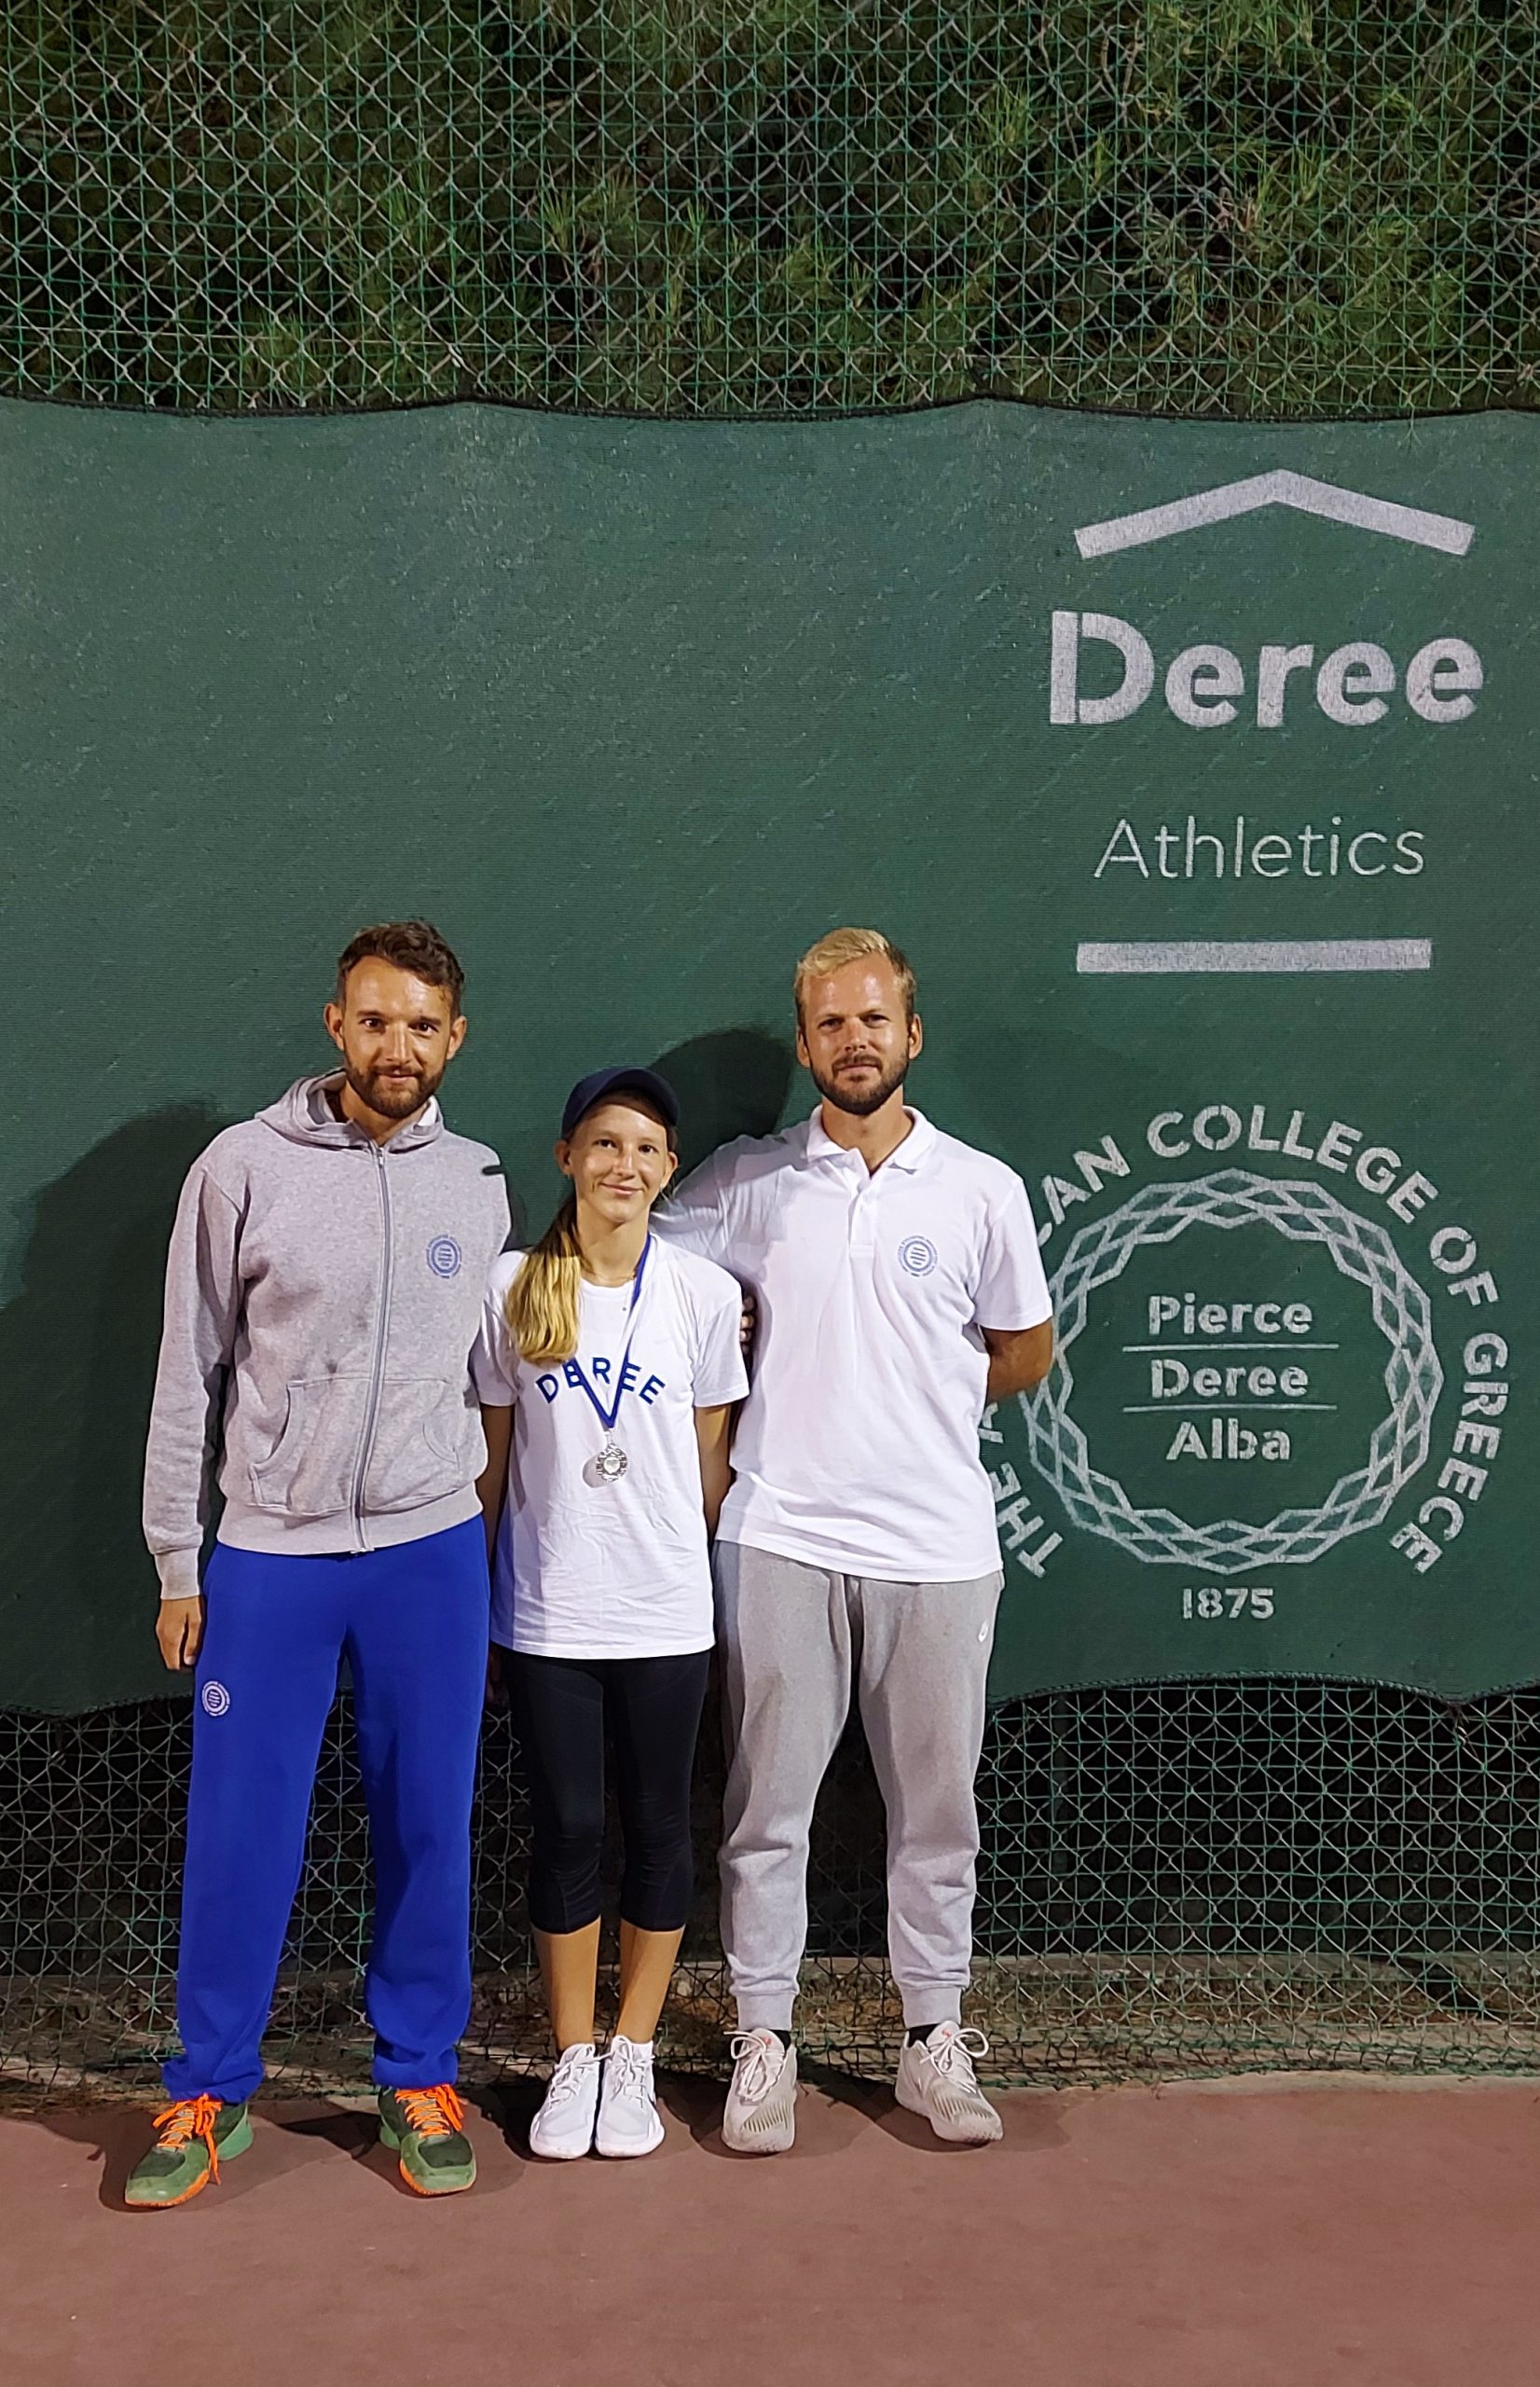 3rd place for the DTA in U12 E3 Tennis Tournament!